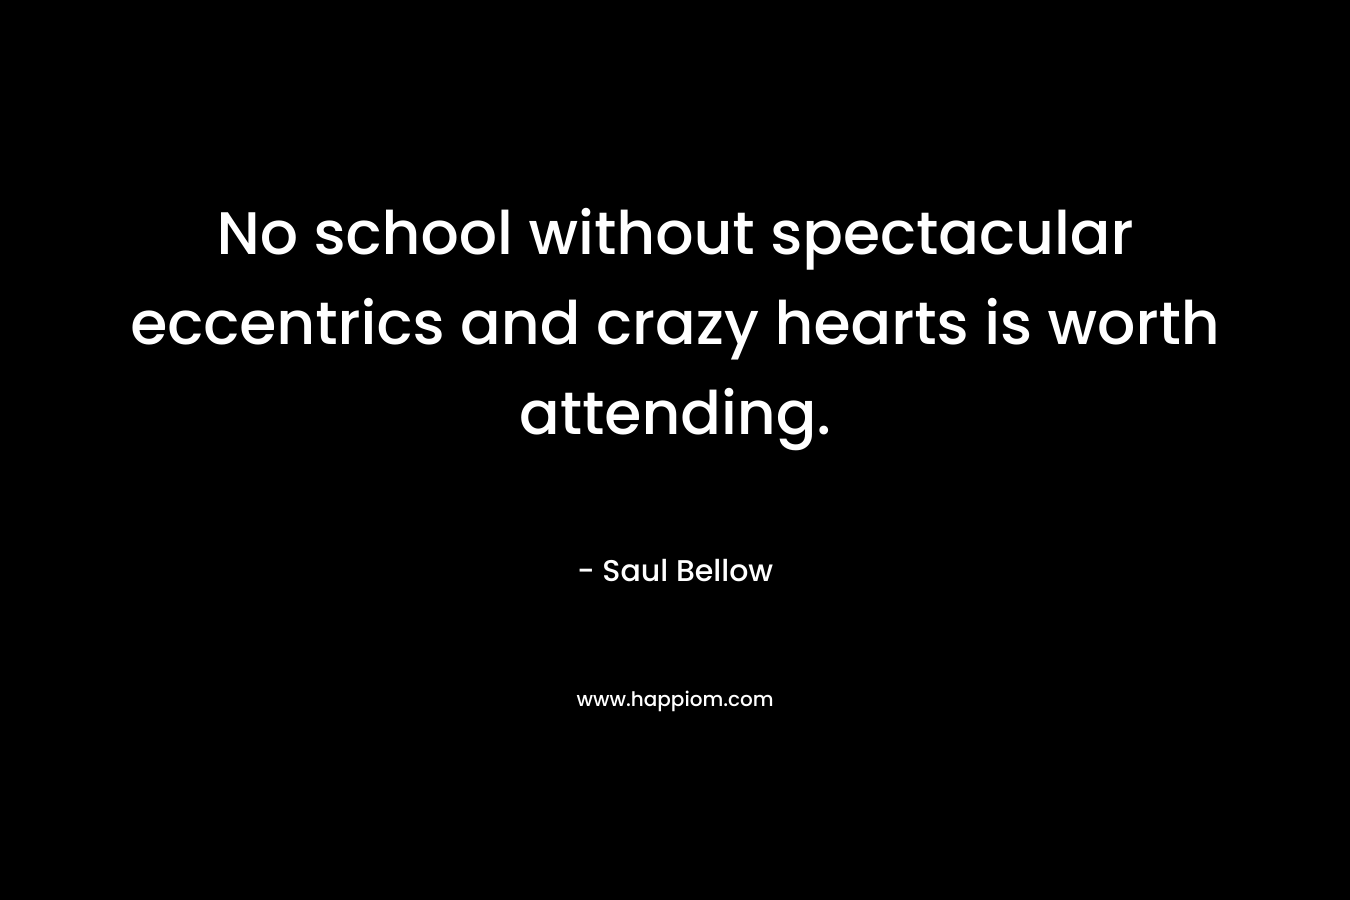 No school without spectacular eccentrics and crazy hearts is worth attending. – Saul Bellow